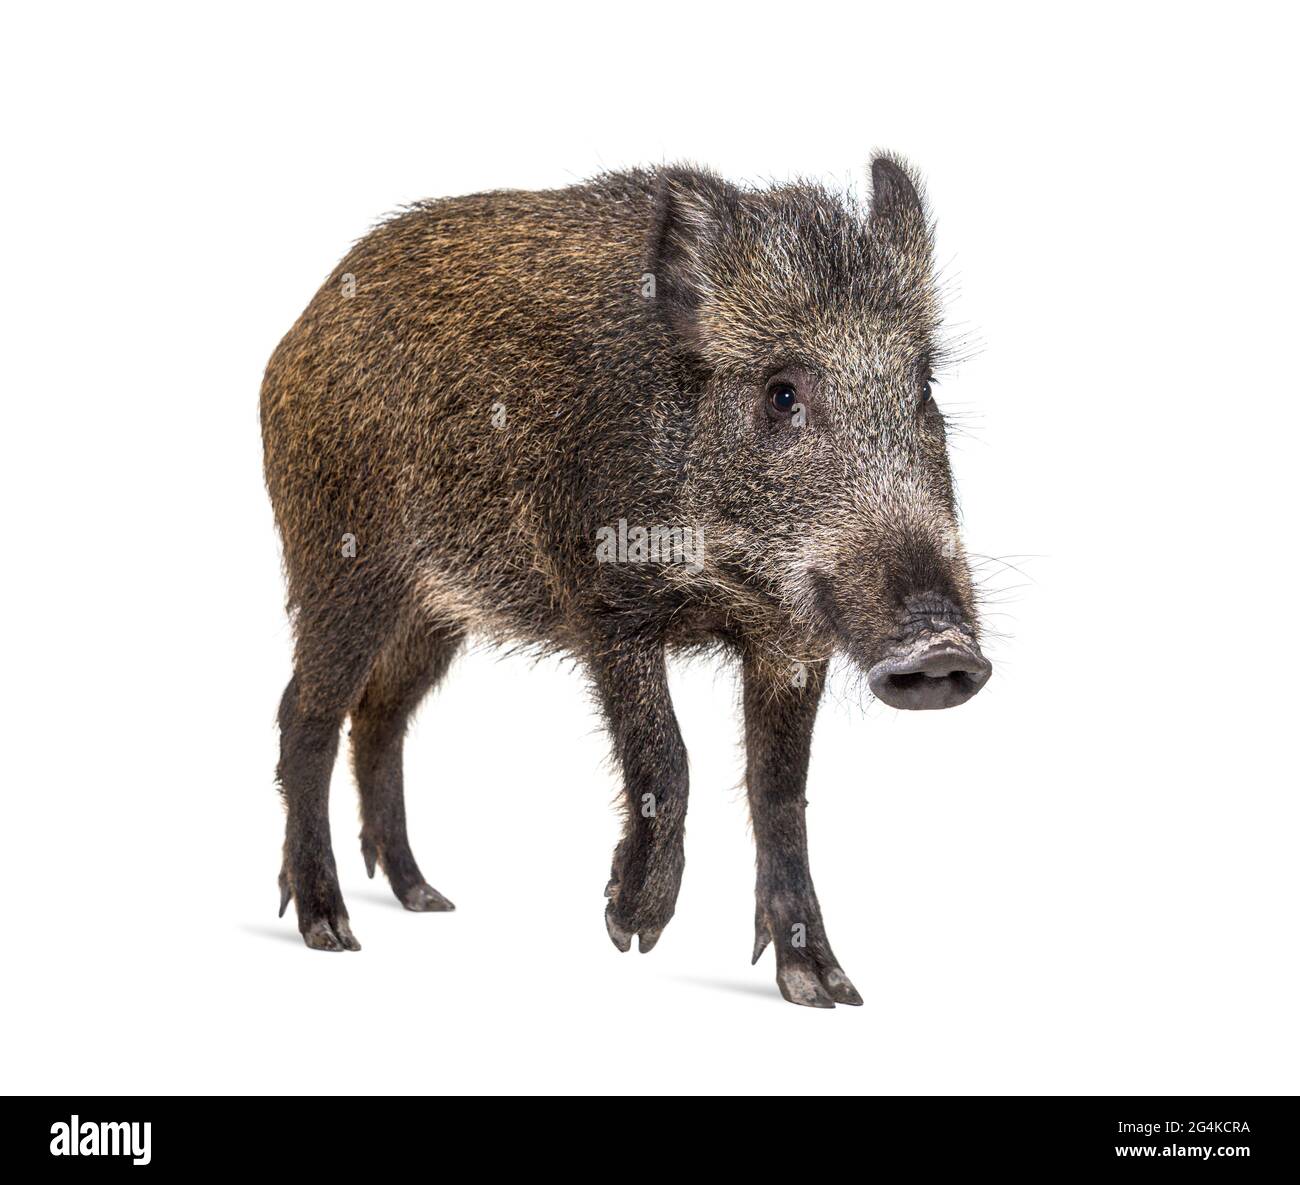 Wild boar standing in front, isolated on white Stock Photo